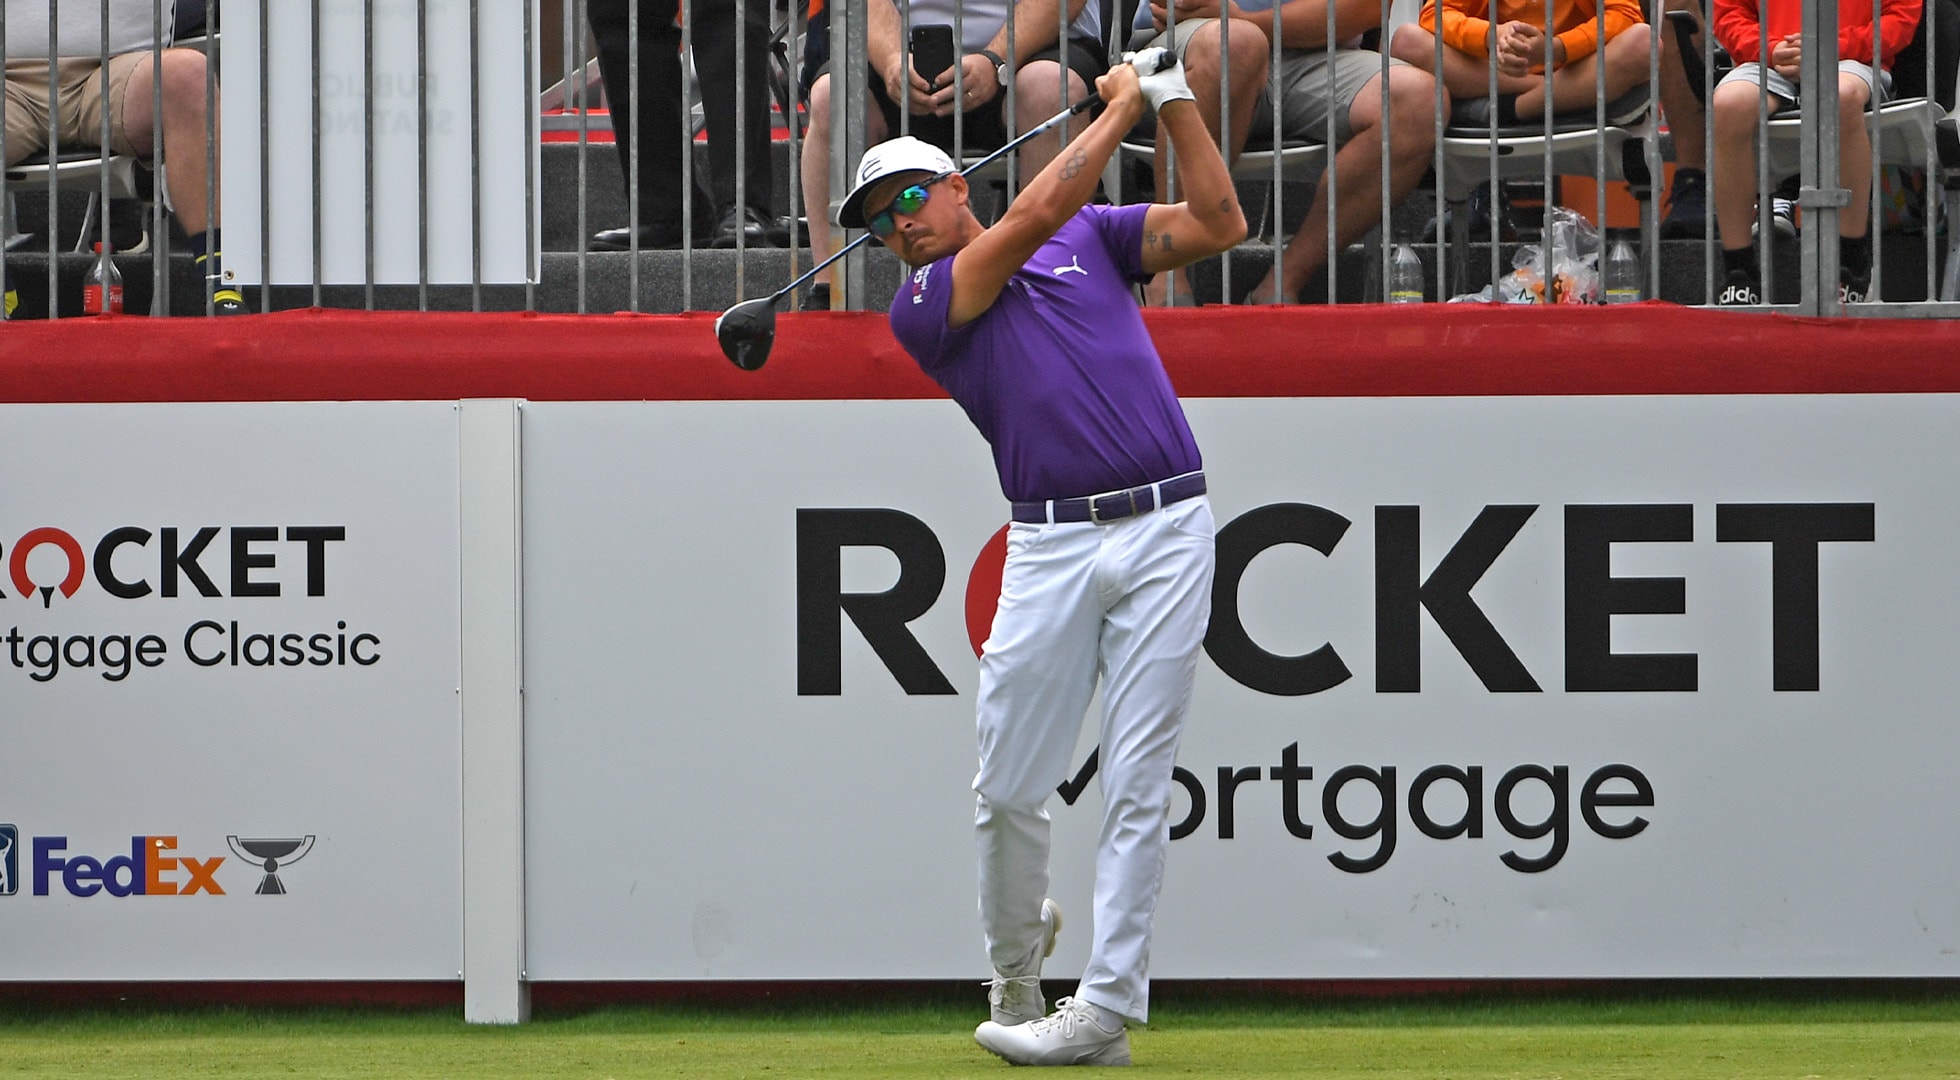 How to watch: Live streams for 2023 Rocket Mortgage Classic, U.S. Senior Open, British Masters